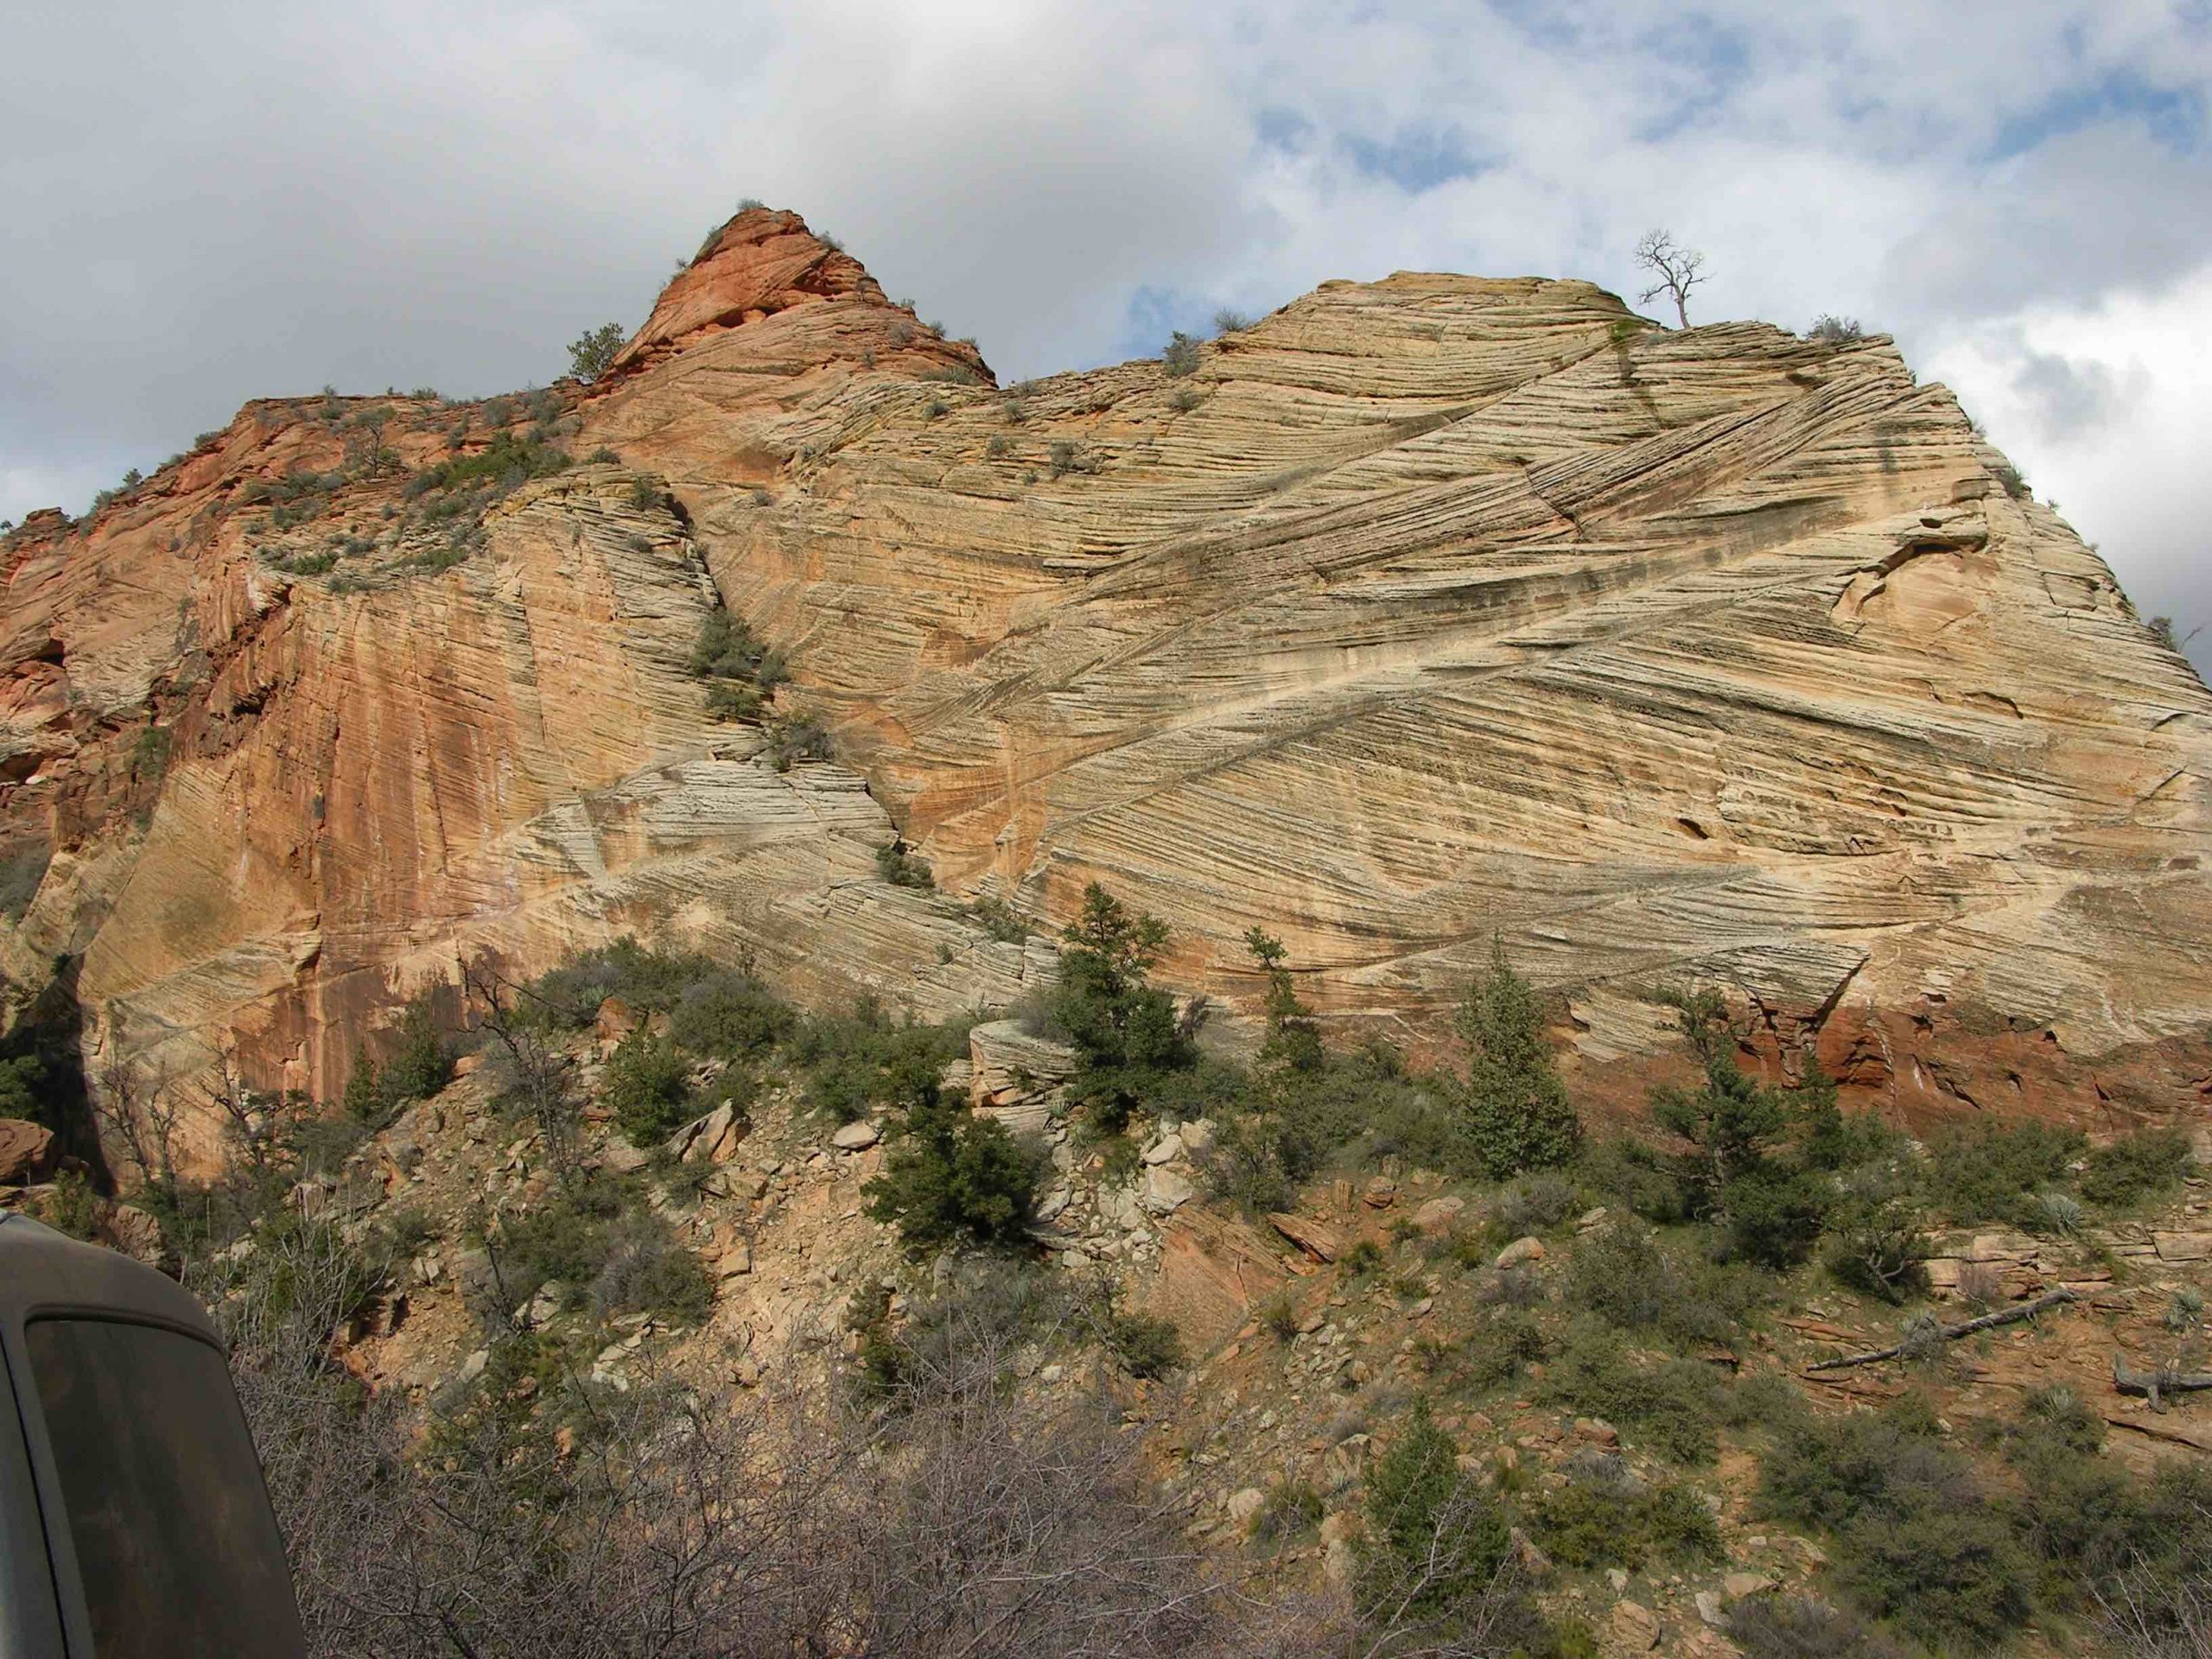 This image shows an example of cross-bedding, which looks like layers of sedimentary rocks dipping in different directions.